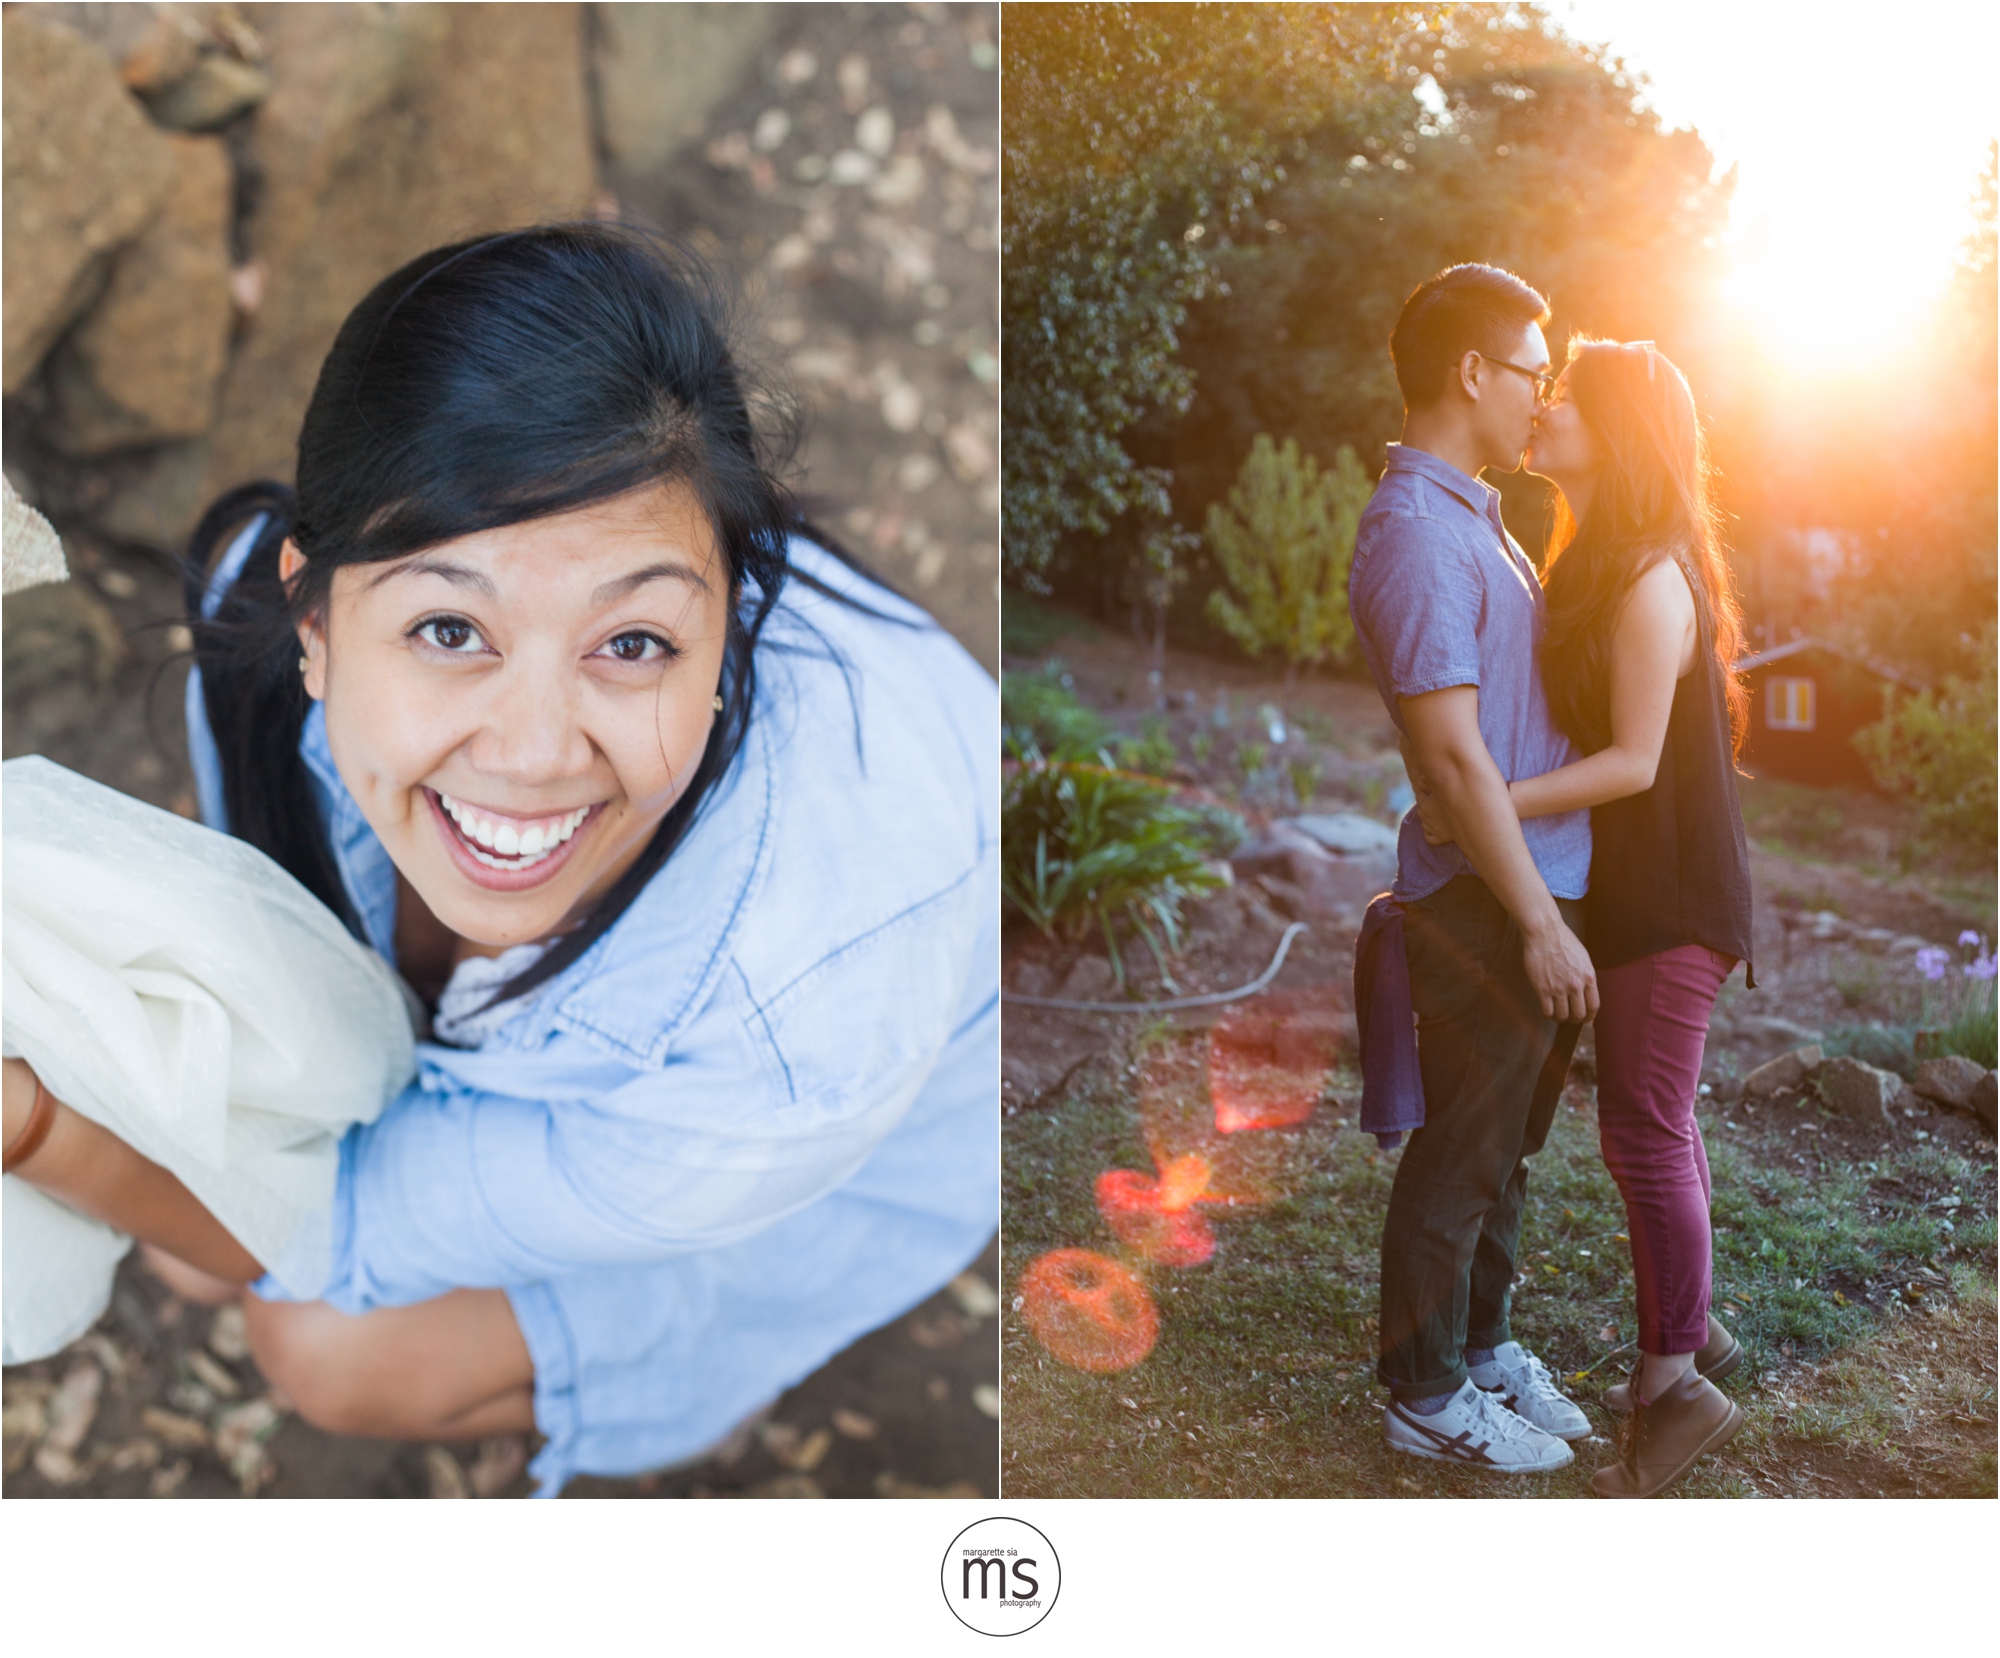 margarette sia photography first wedding_0024